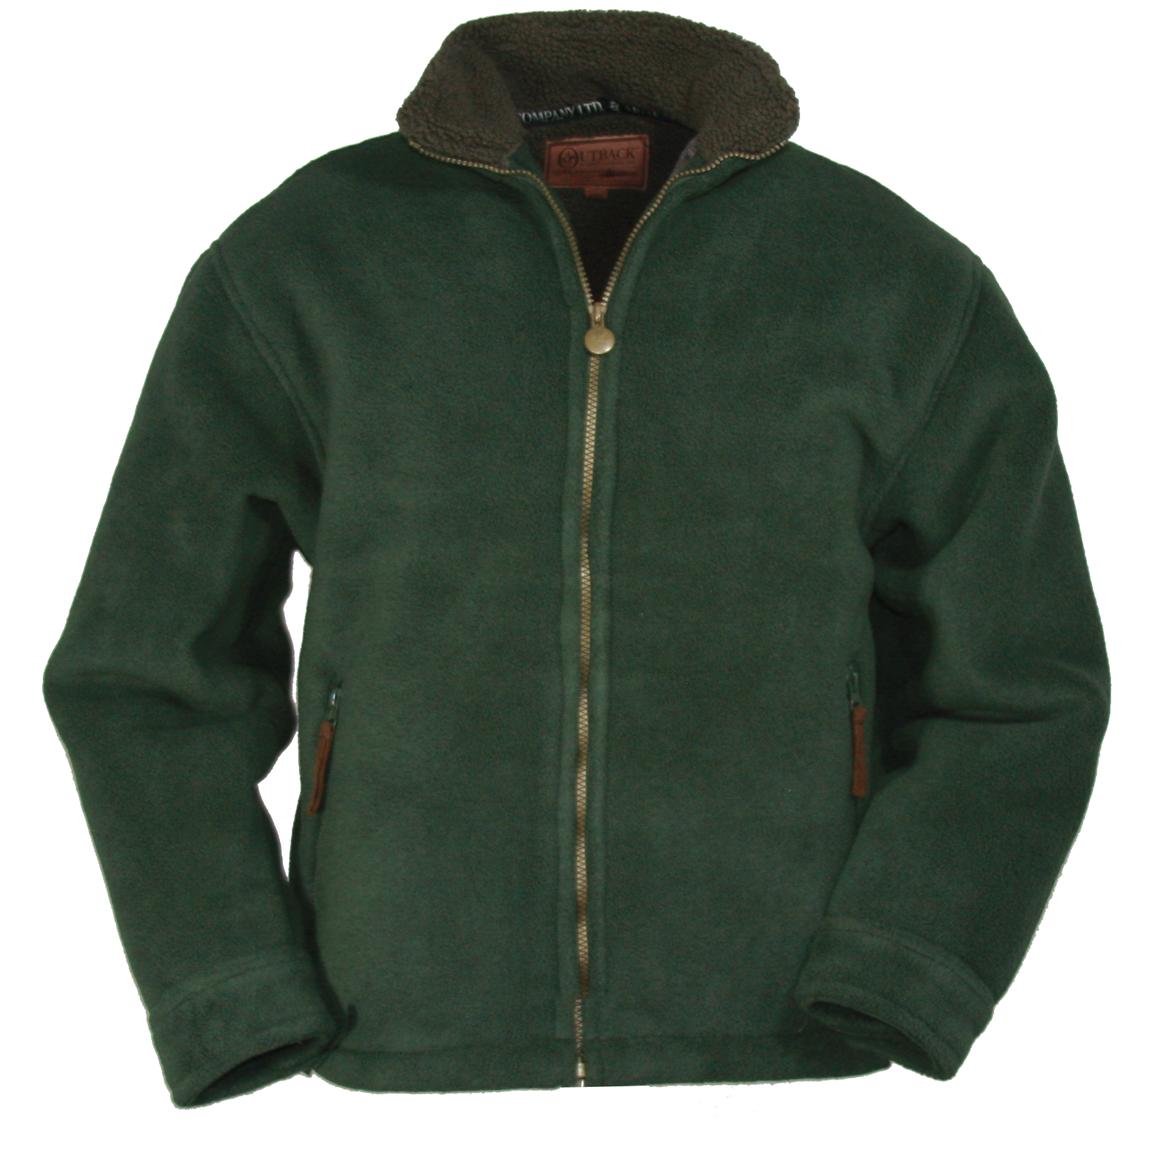 Men's Outback Trading Company® Summit Fleece Jacket - 185848, Insulated ...